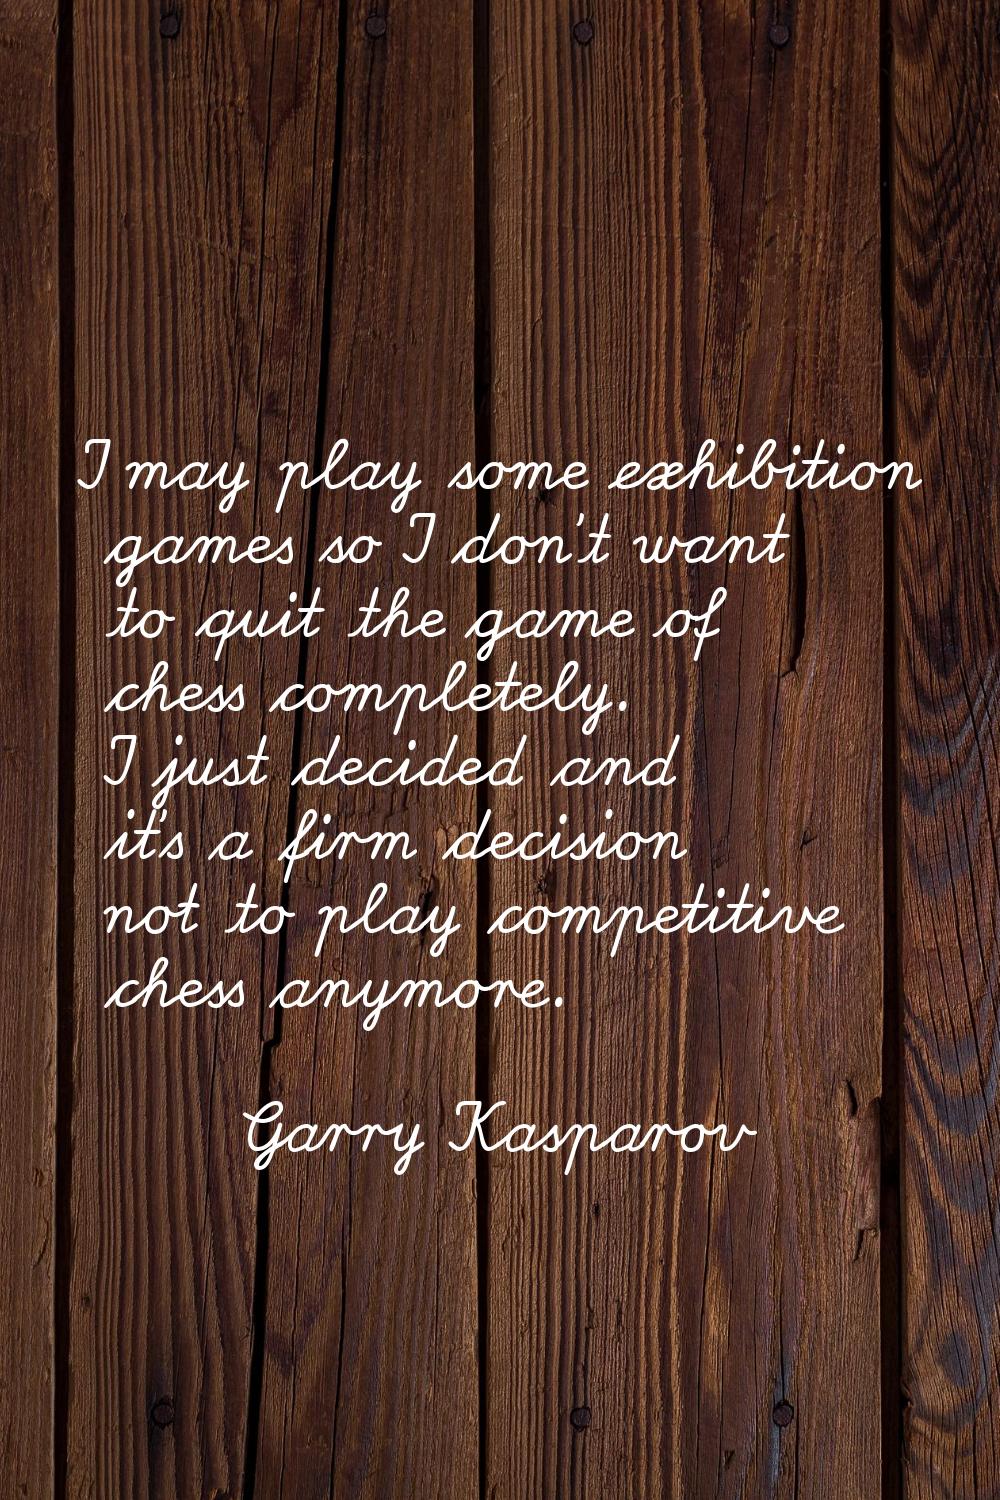 I may play some exhibition games so I don't want to quit the game of chess completely. I just decid